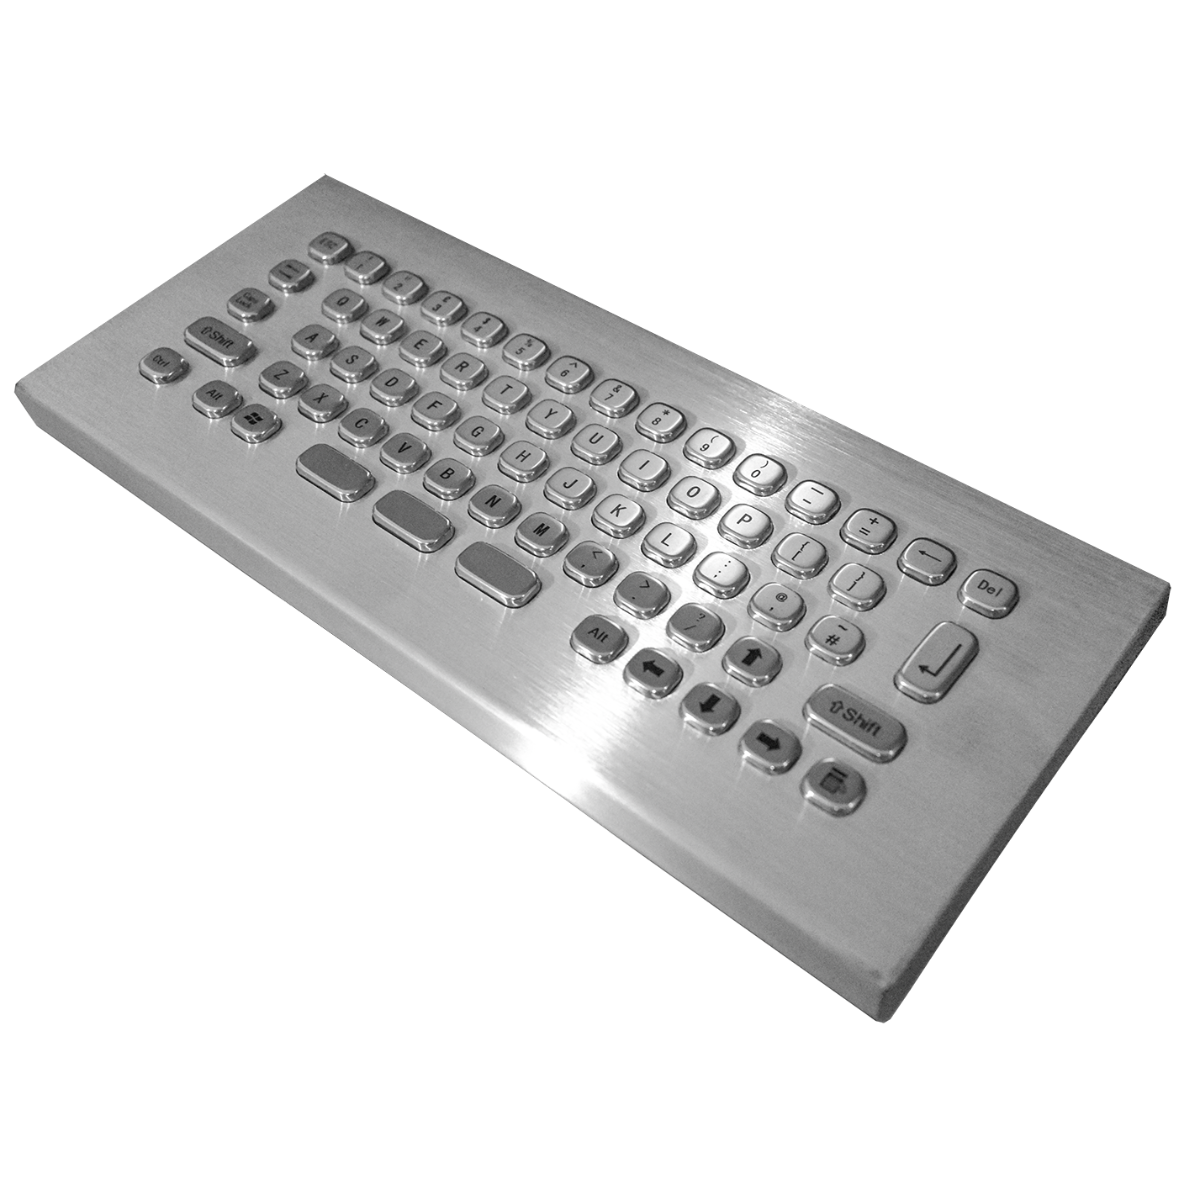 Stainless steel computer keyboard with optional touchpad